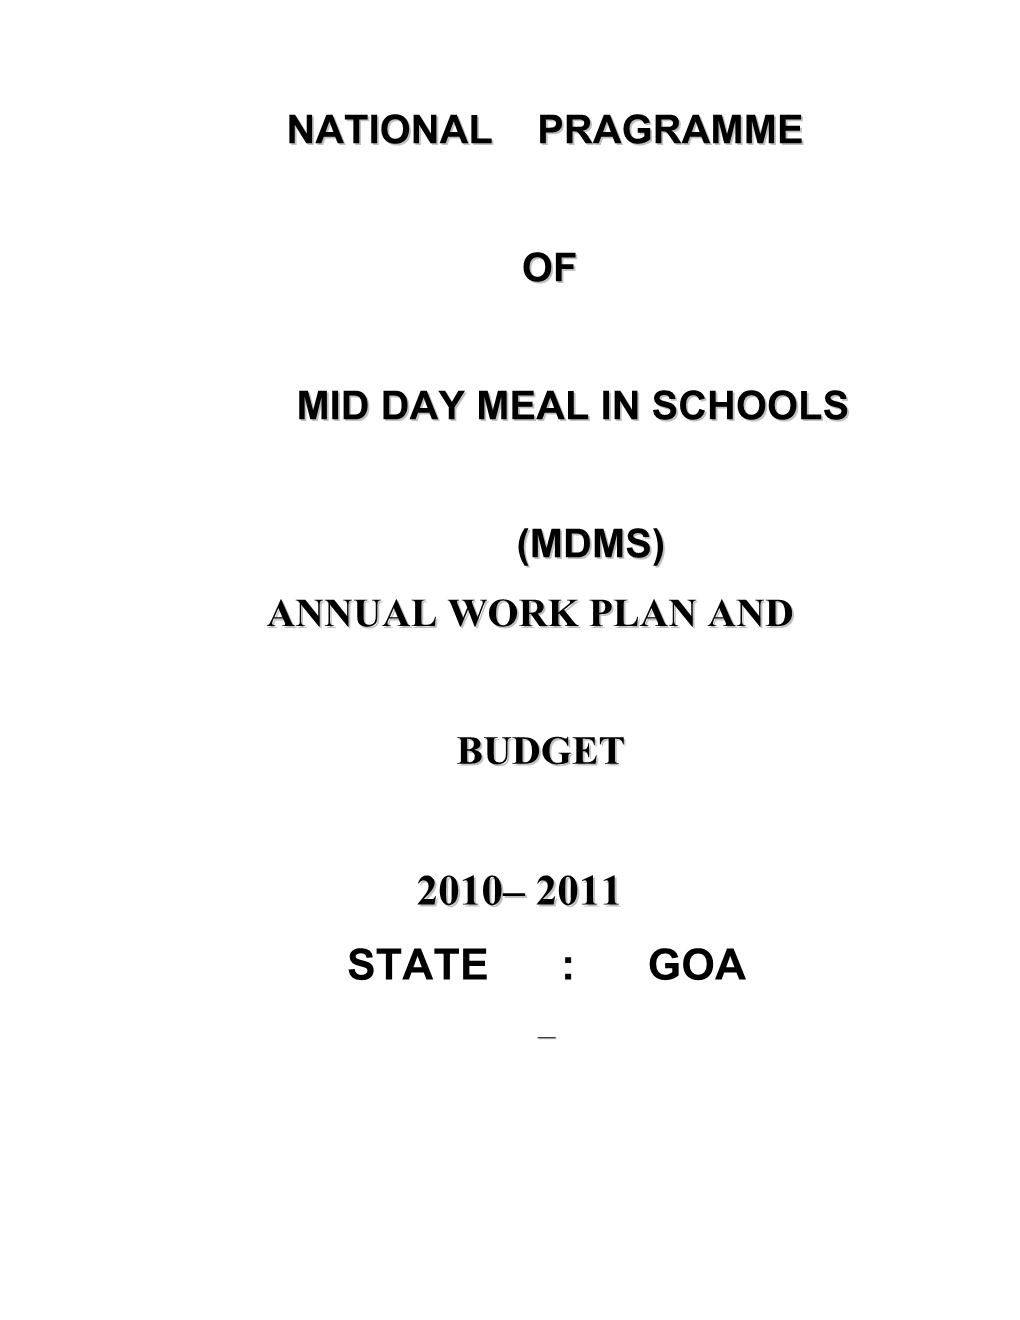 Mid Day Meal in Schools